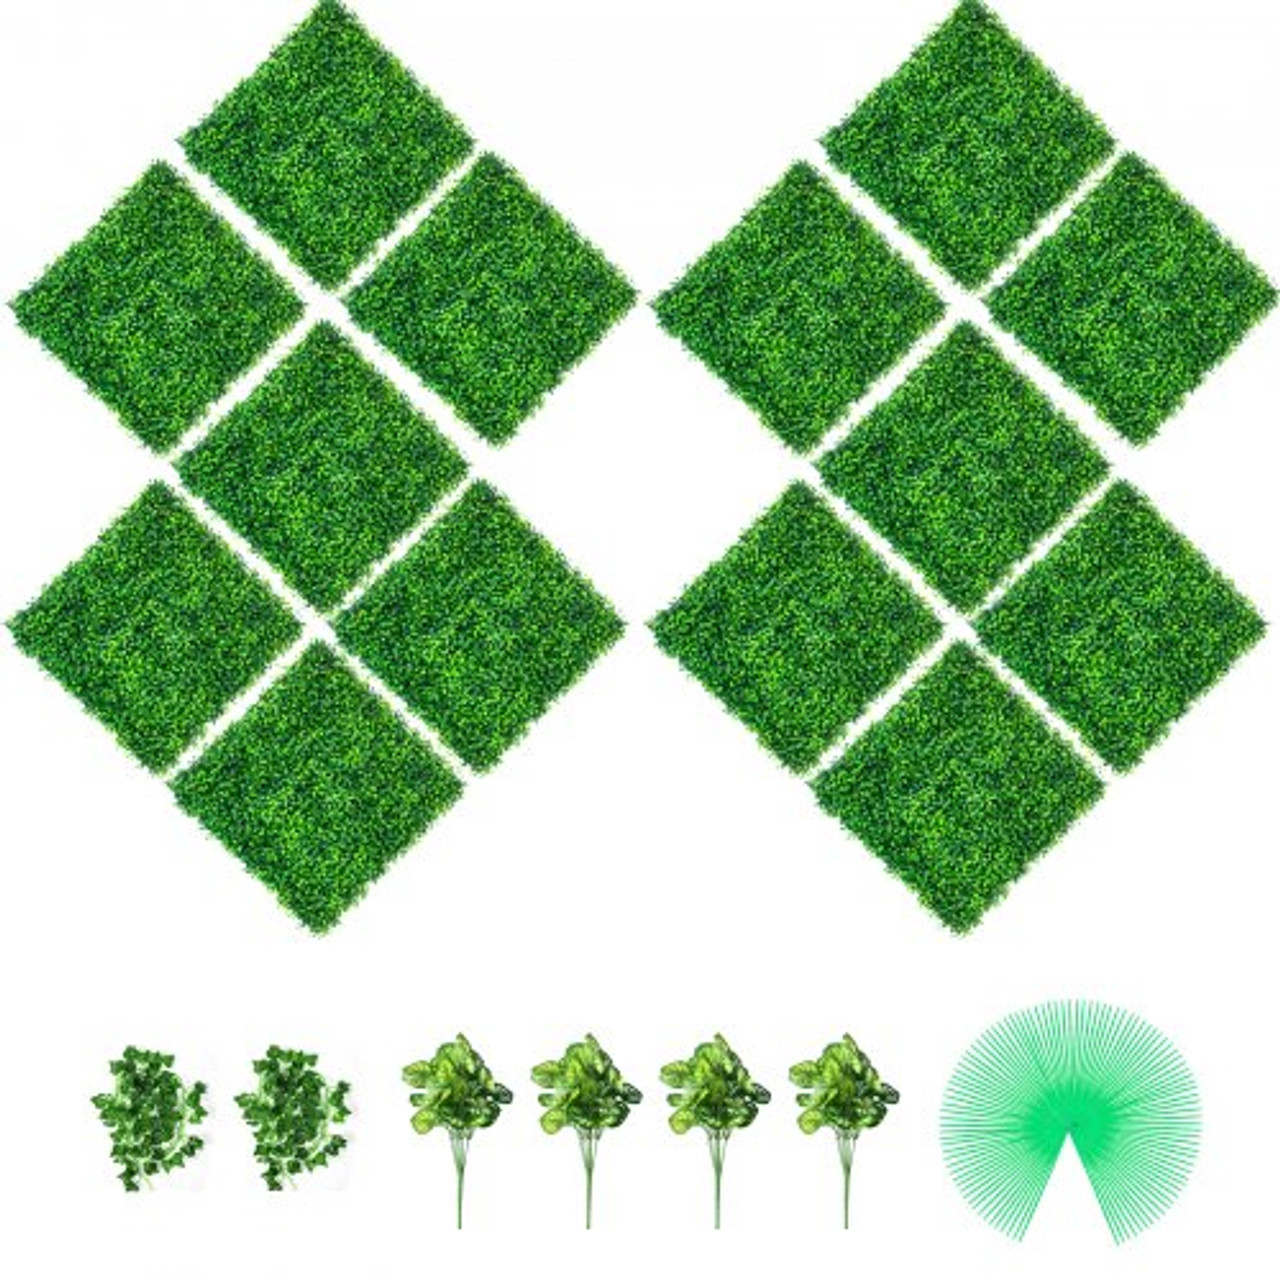 Artificial Boxwood Panels, 14 PCS 20"x20" Boxwood Hedge Wall Panels, PE Artificial Grass Backdrop Wall 1.6", Privacy Hedge Screen for Decoration of Outdoor, Indoor, Garden, Fence, and Backyard